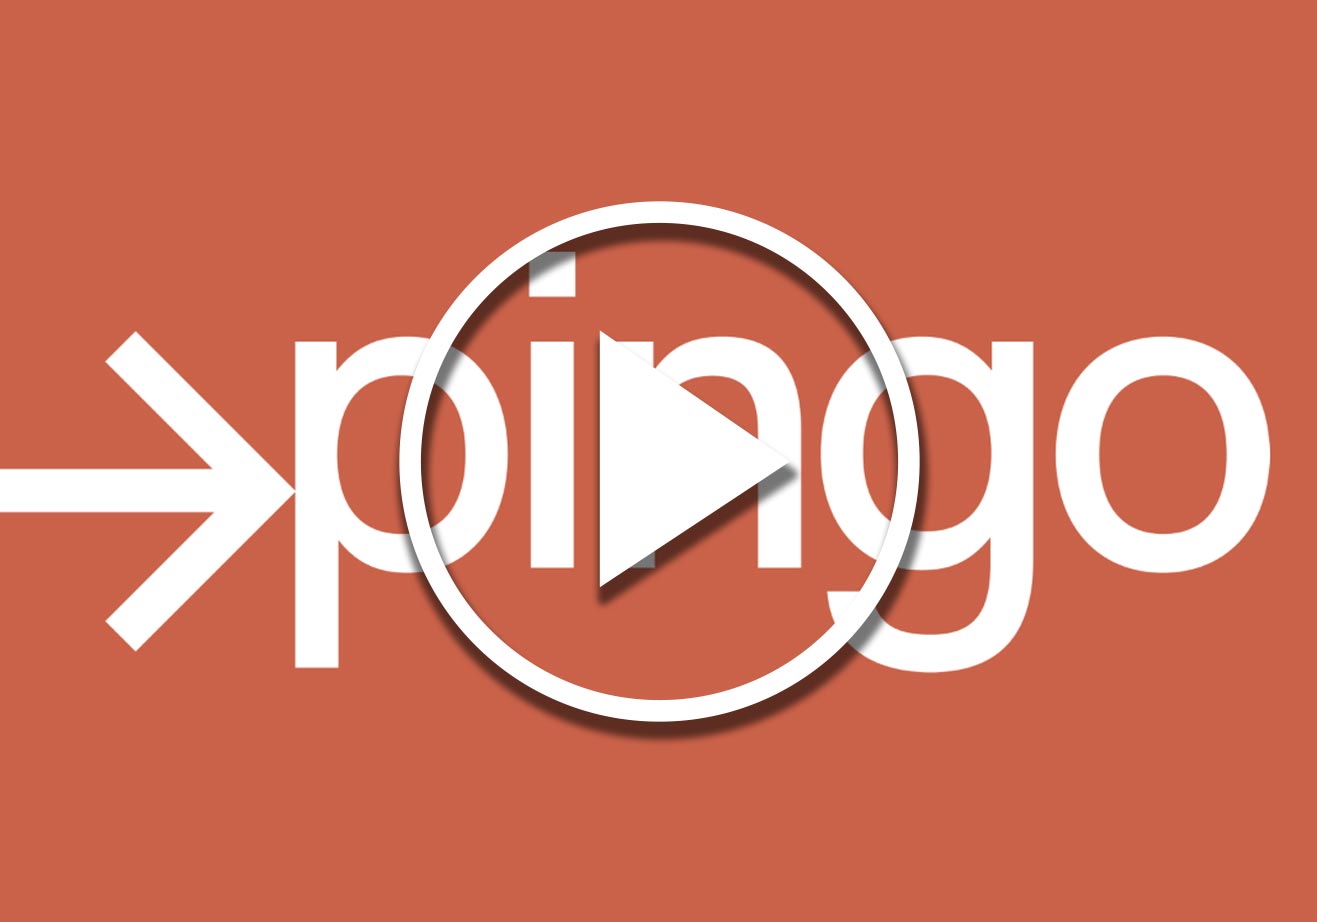 How to Use the Ride Pingo App